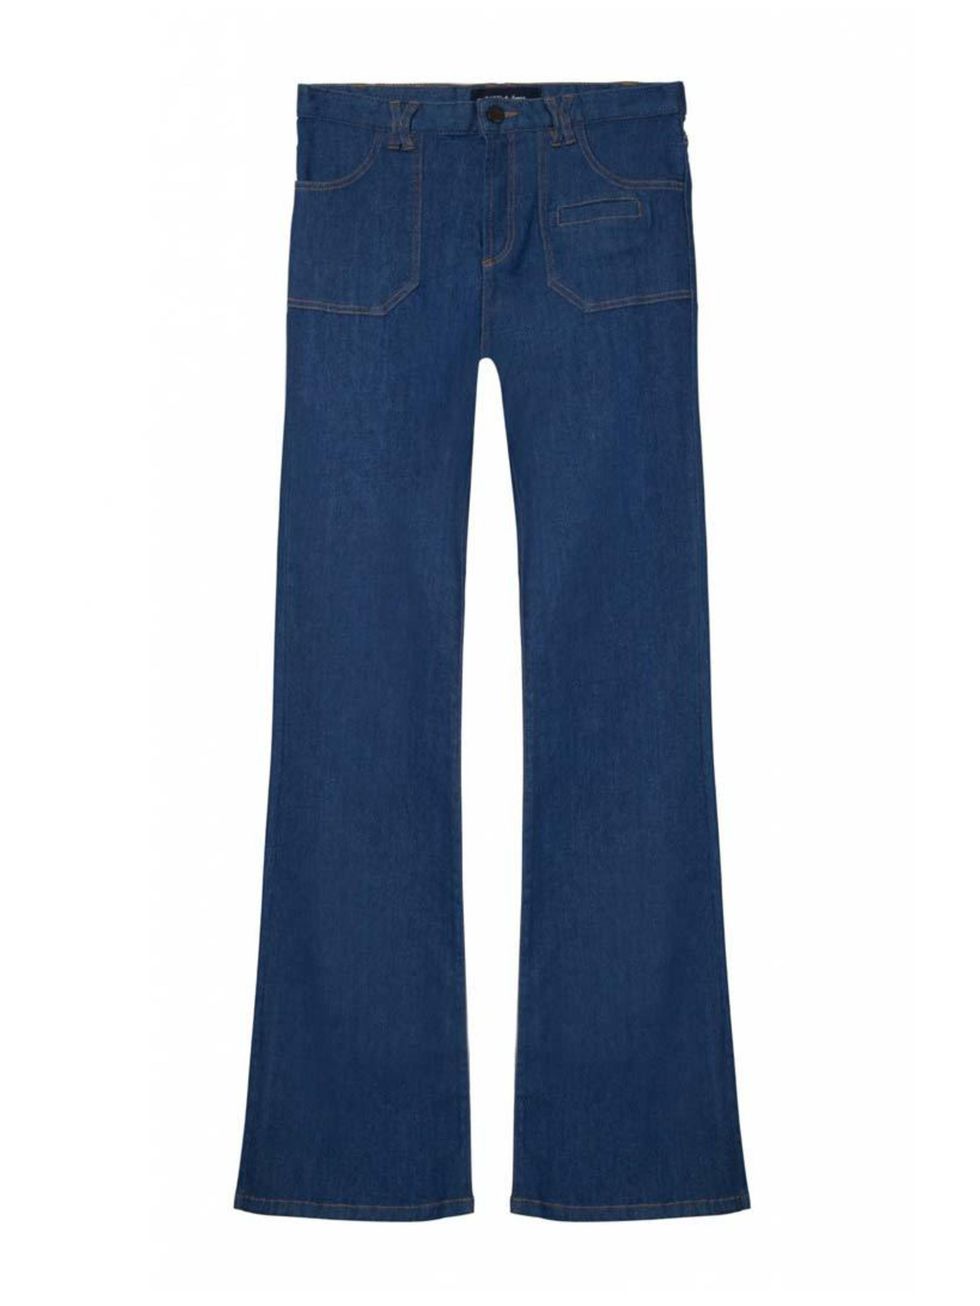 <p>Could these be the perfect 1970s flares? Try them with a poloneck, and find out.</p>

<p><a href="http://www.gerarddarel.com/en_uk/argentina-139228.html" target="_blank">Gerard Darel</a> jeans, £140</p>